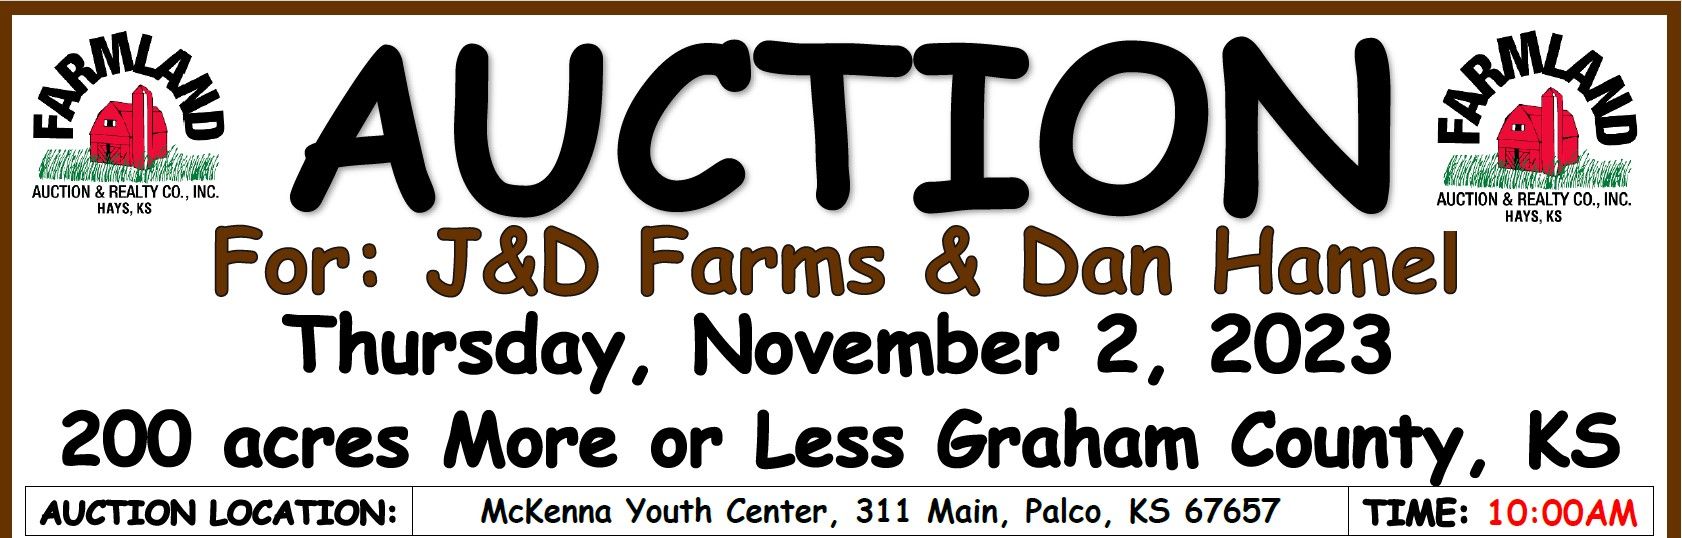 Auction flyer for *Auction Canceled SOLD PRIVATE TREATY* Auction: 200 acres +/- Graham County, KS